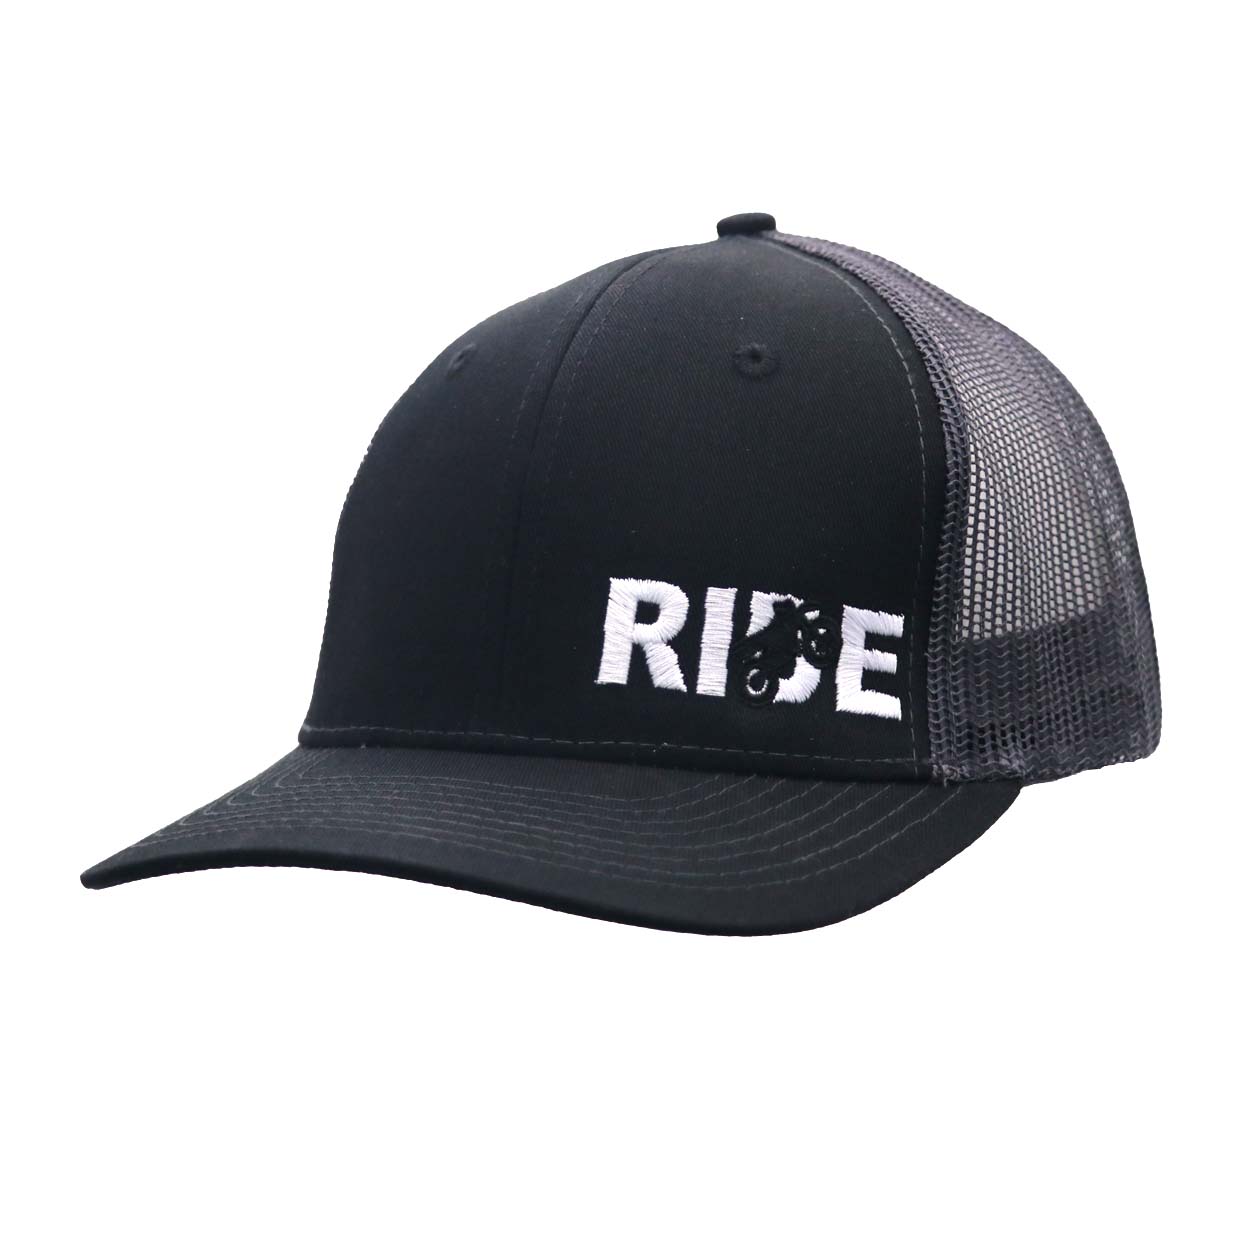 Ride Moto Logo Classic Pro Night Out Embroidered Snapback Trucker Hat Black/Gray